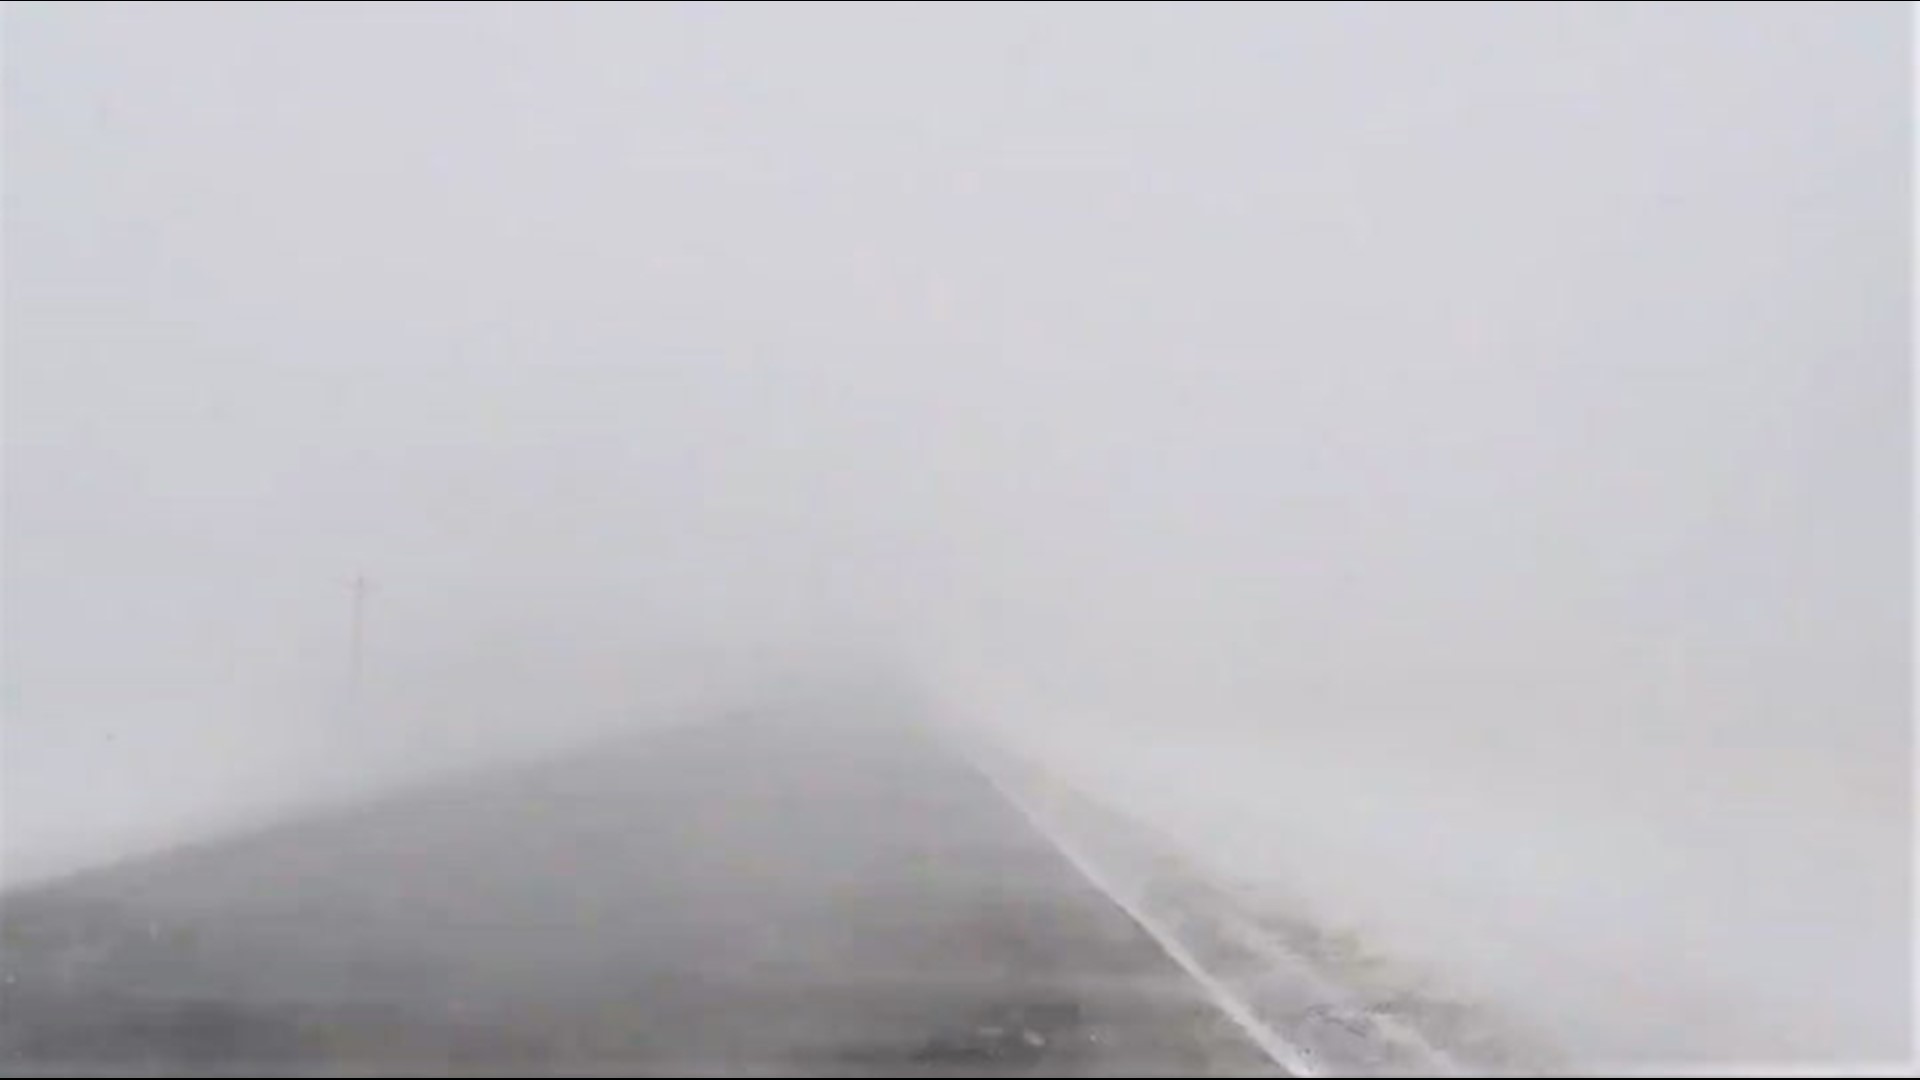 Gusty winds during a snow squall created dangerous, blizzardlike whiteout conditions on Highway 24, just outside of Goodland, Kansas, on Feb. 25.